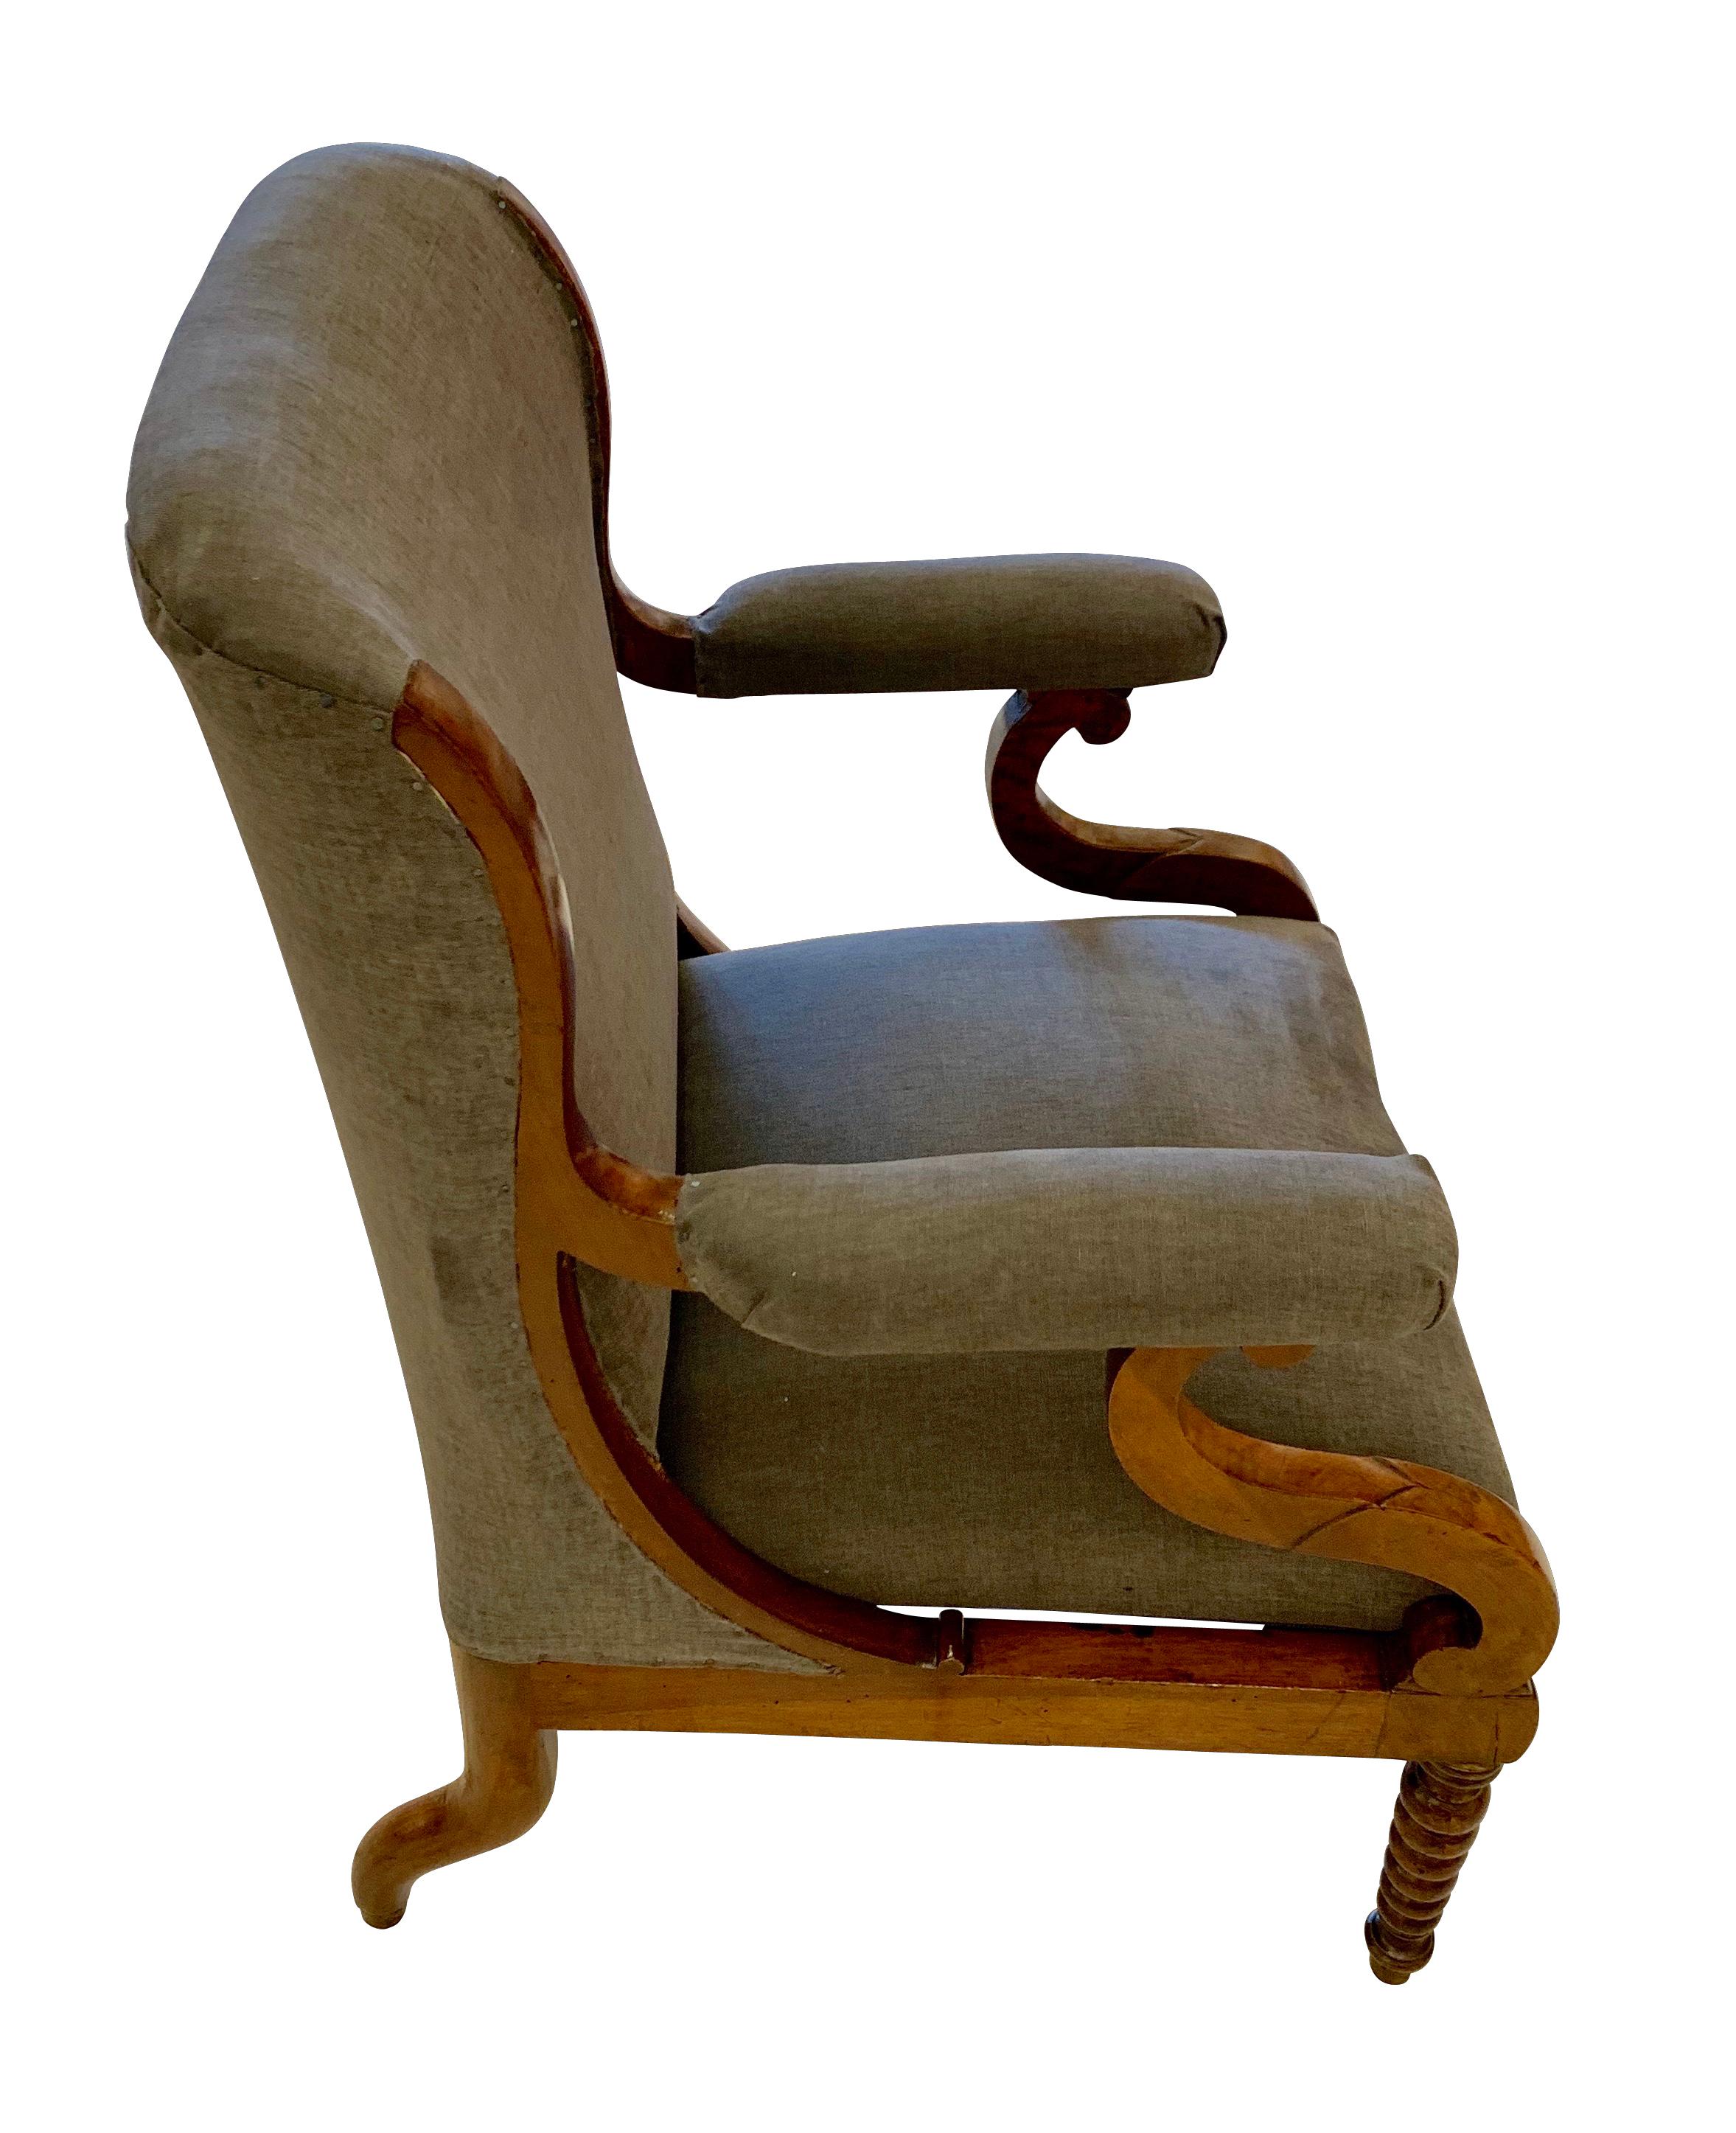 19th century French Louis Phillipe armed walnut side chair
Newly reupholstered in dark grey homespun vintage linen.
Arm pads are upholstered.
Spool front legs and curved back legs.
Excellent condition for age.